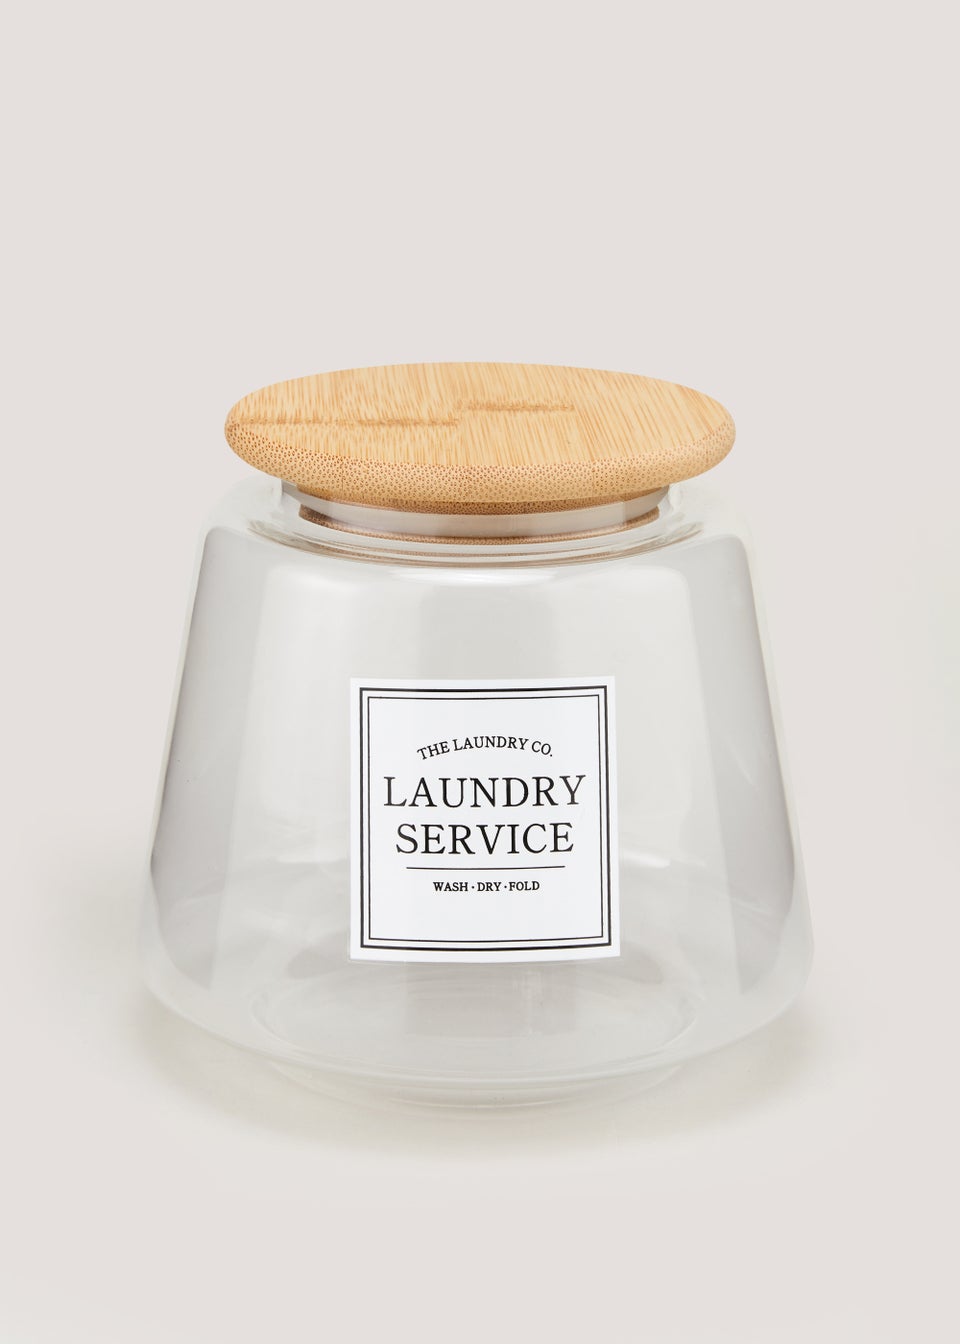 Small The Laundry Co Glass Jar (13.5cm x 12cm)